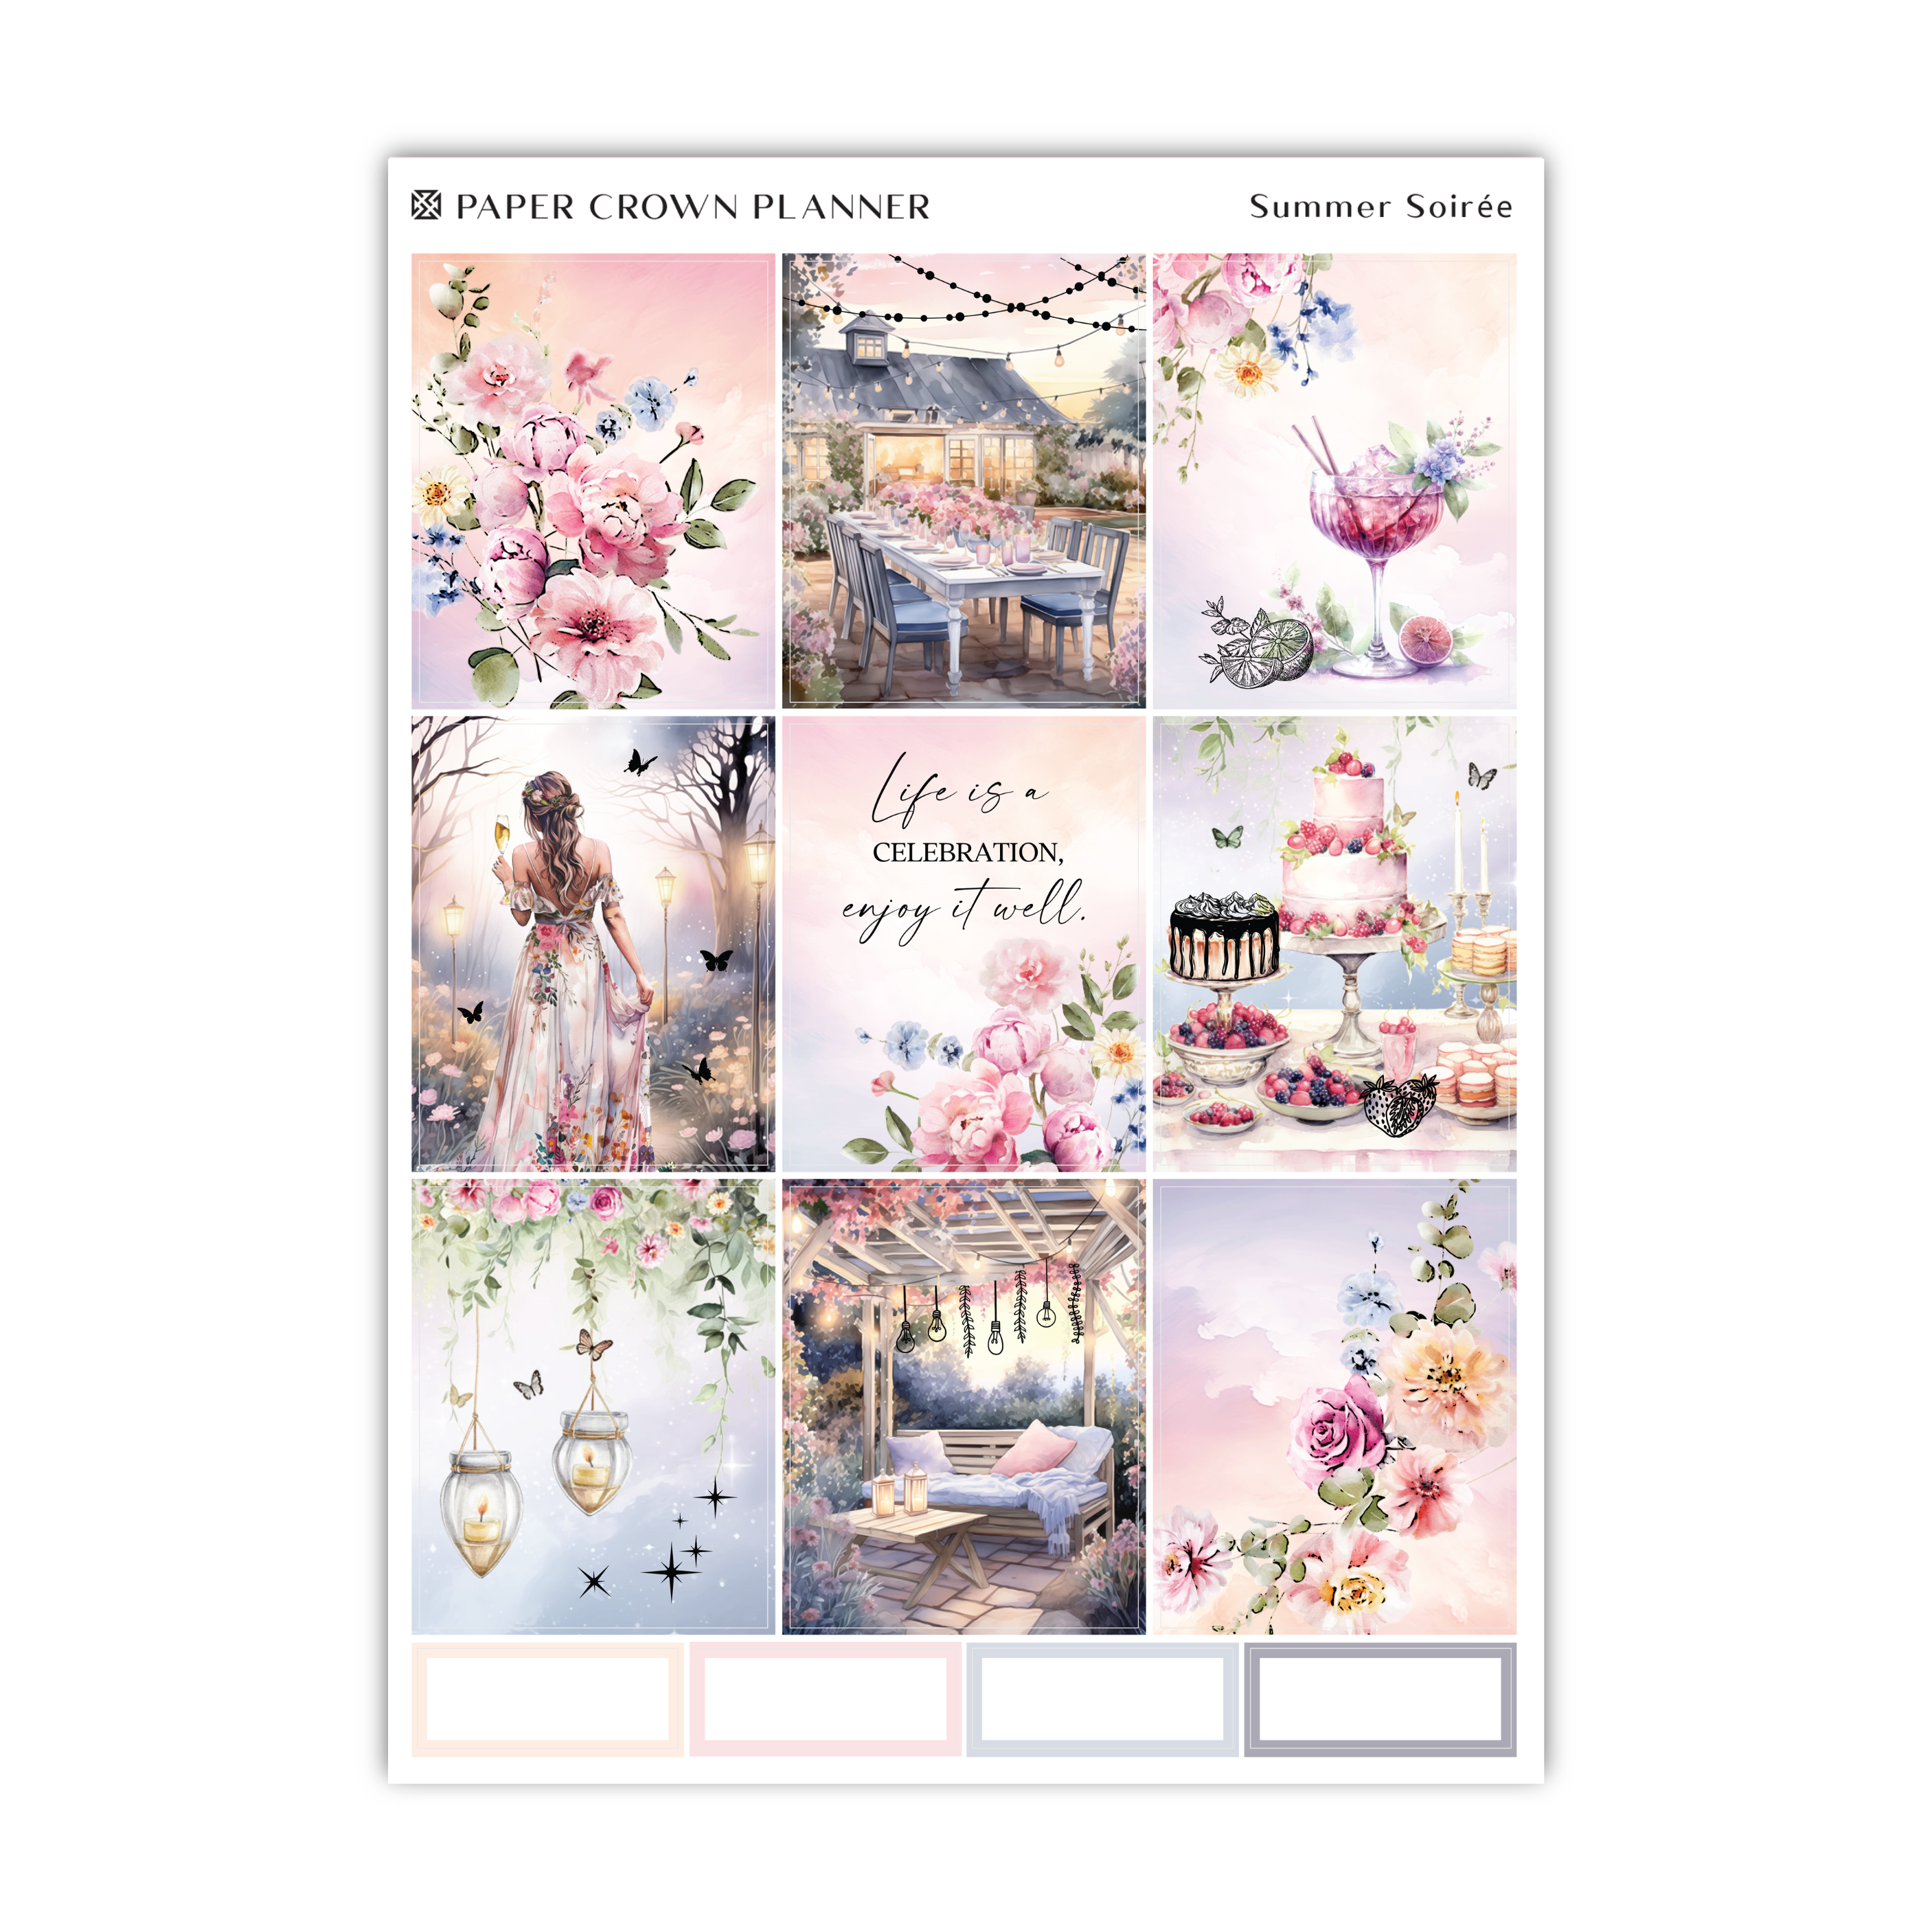 a sticker sheet with a picture of a woman and flowers